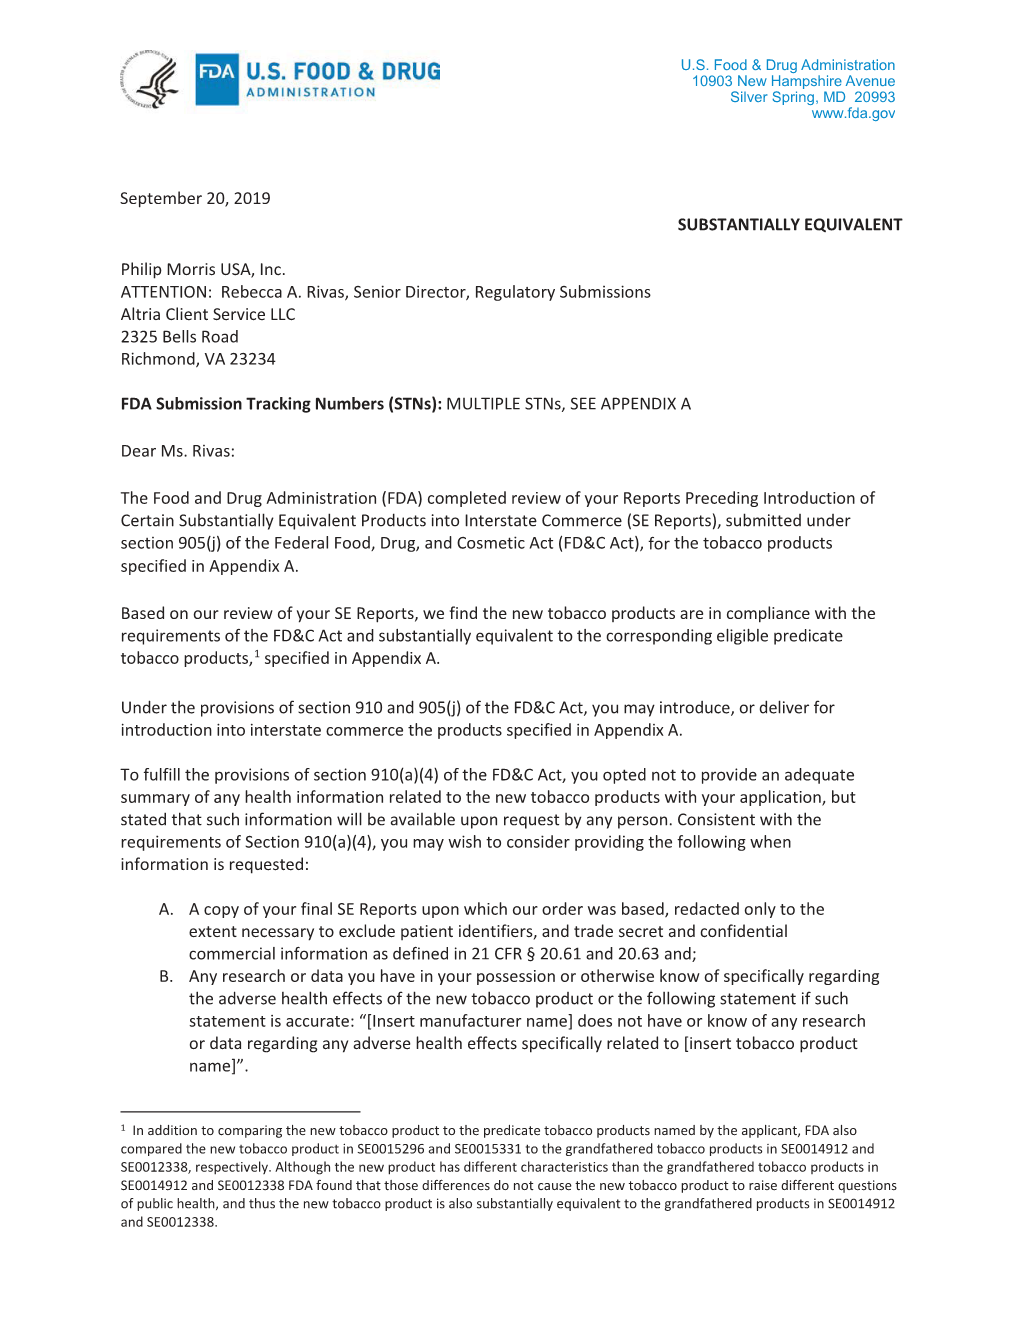 Substantially Equivalent Letter from FDA CTP to Philip Morris USA, Inc